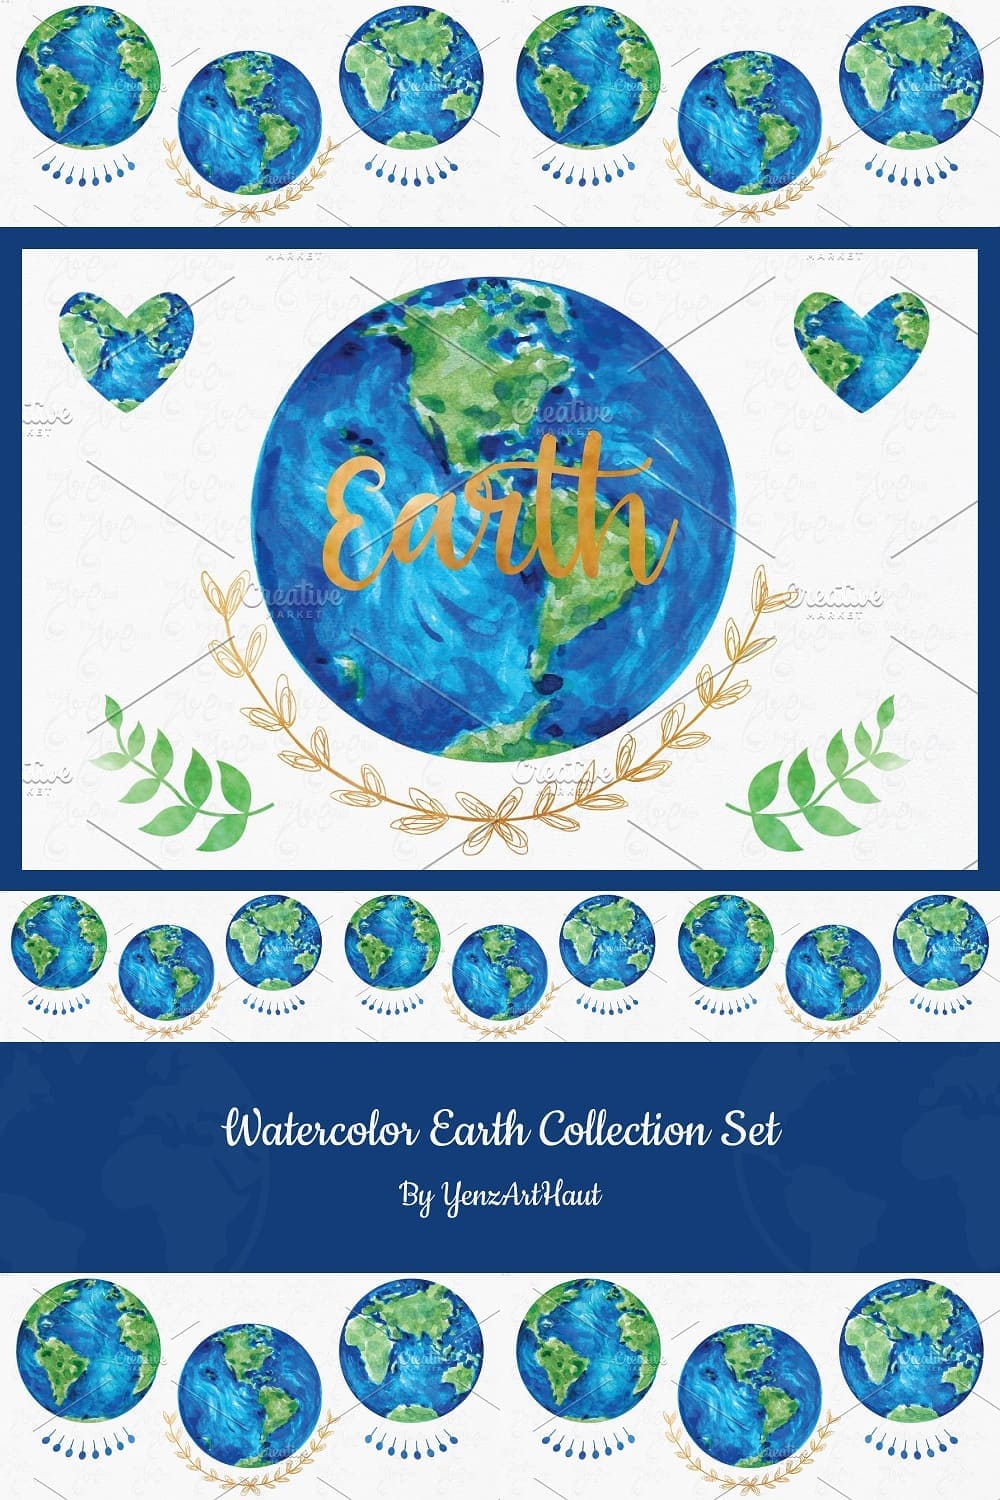 A collection of watercolor planets Earth of various sizes.